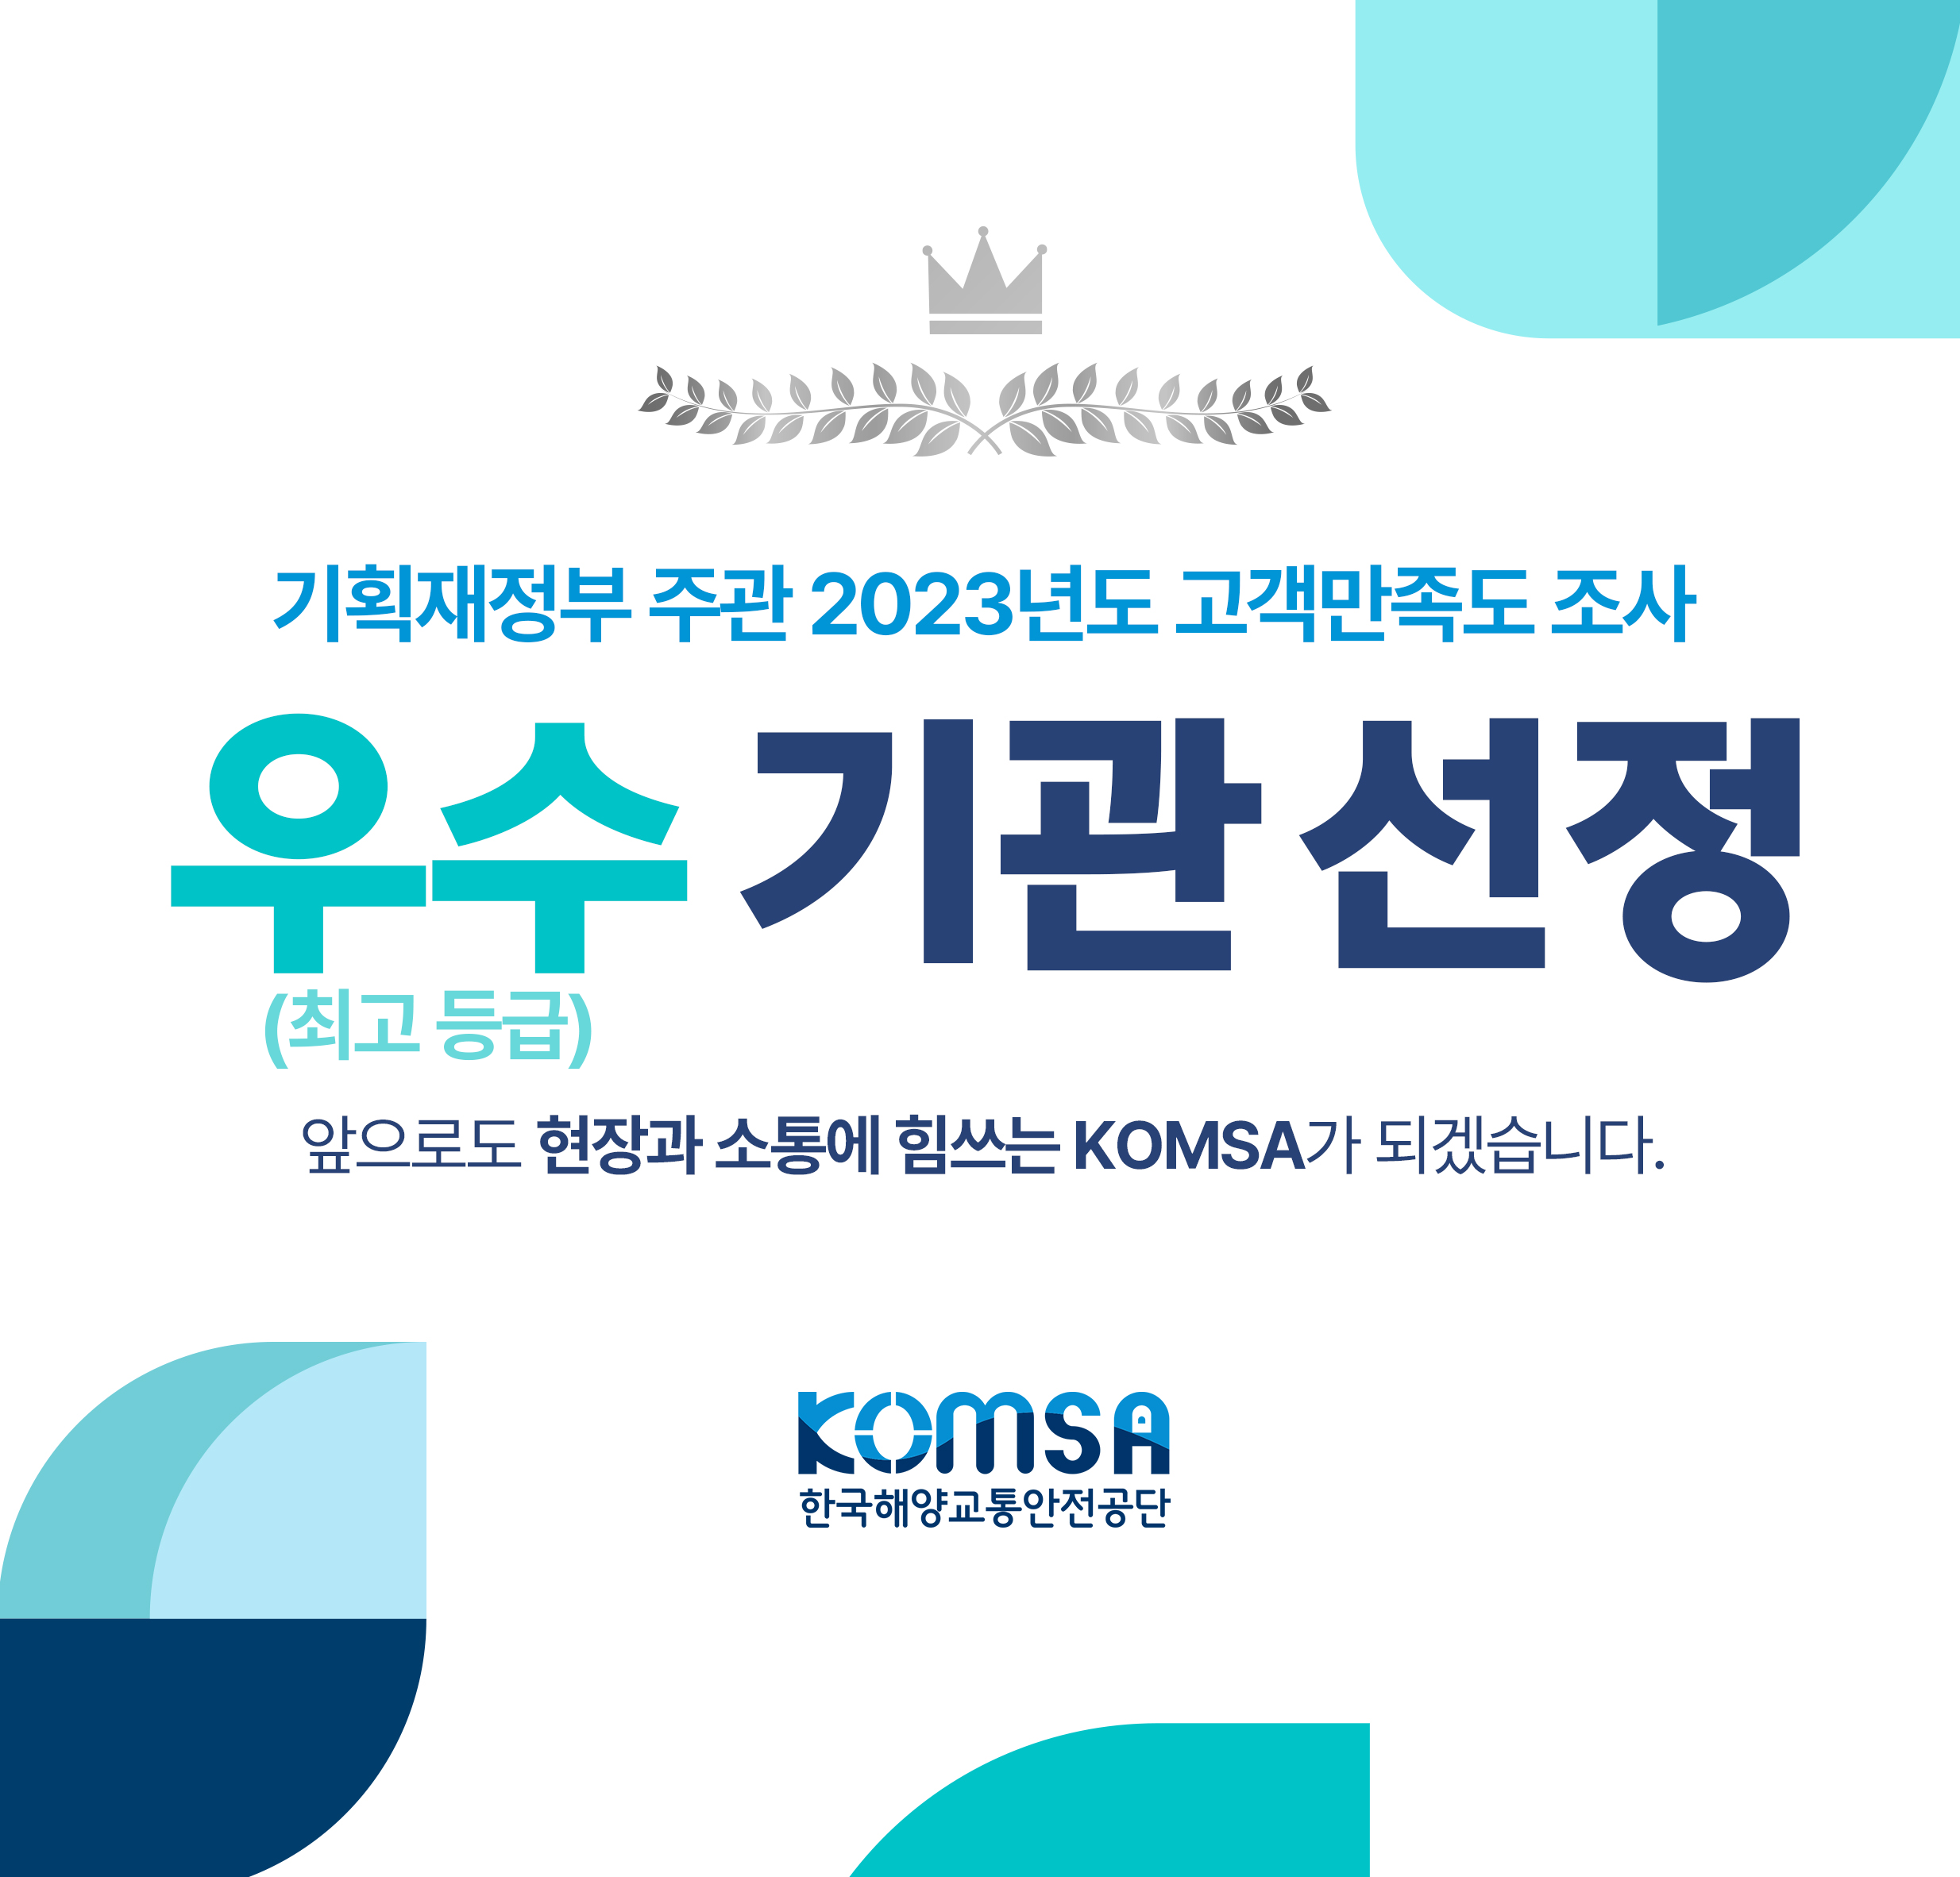 https://komsa.or.kr/kor/;jsessionid=D4CF02A37FCACCE2306CA0E93A0AA51F